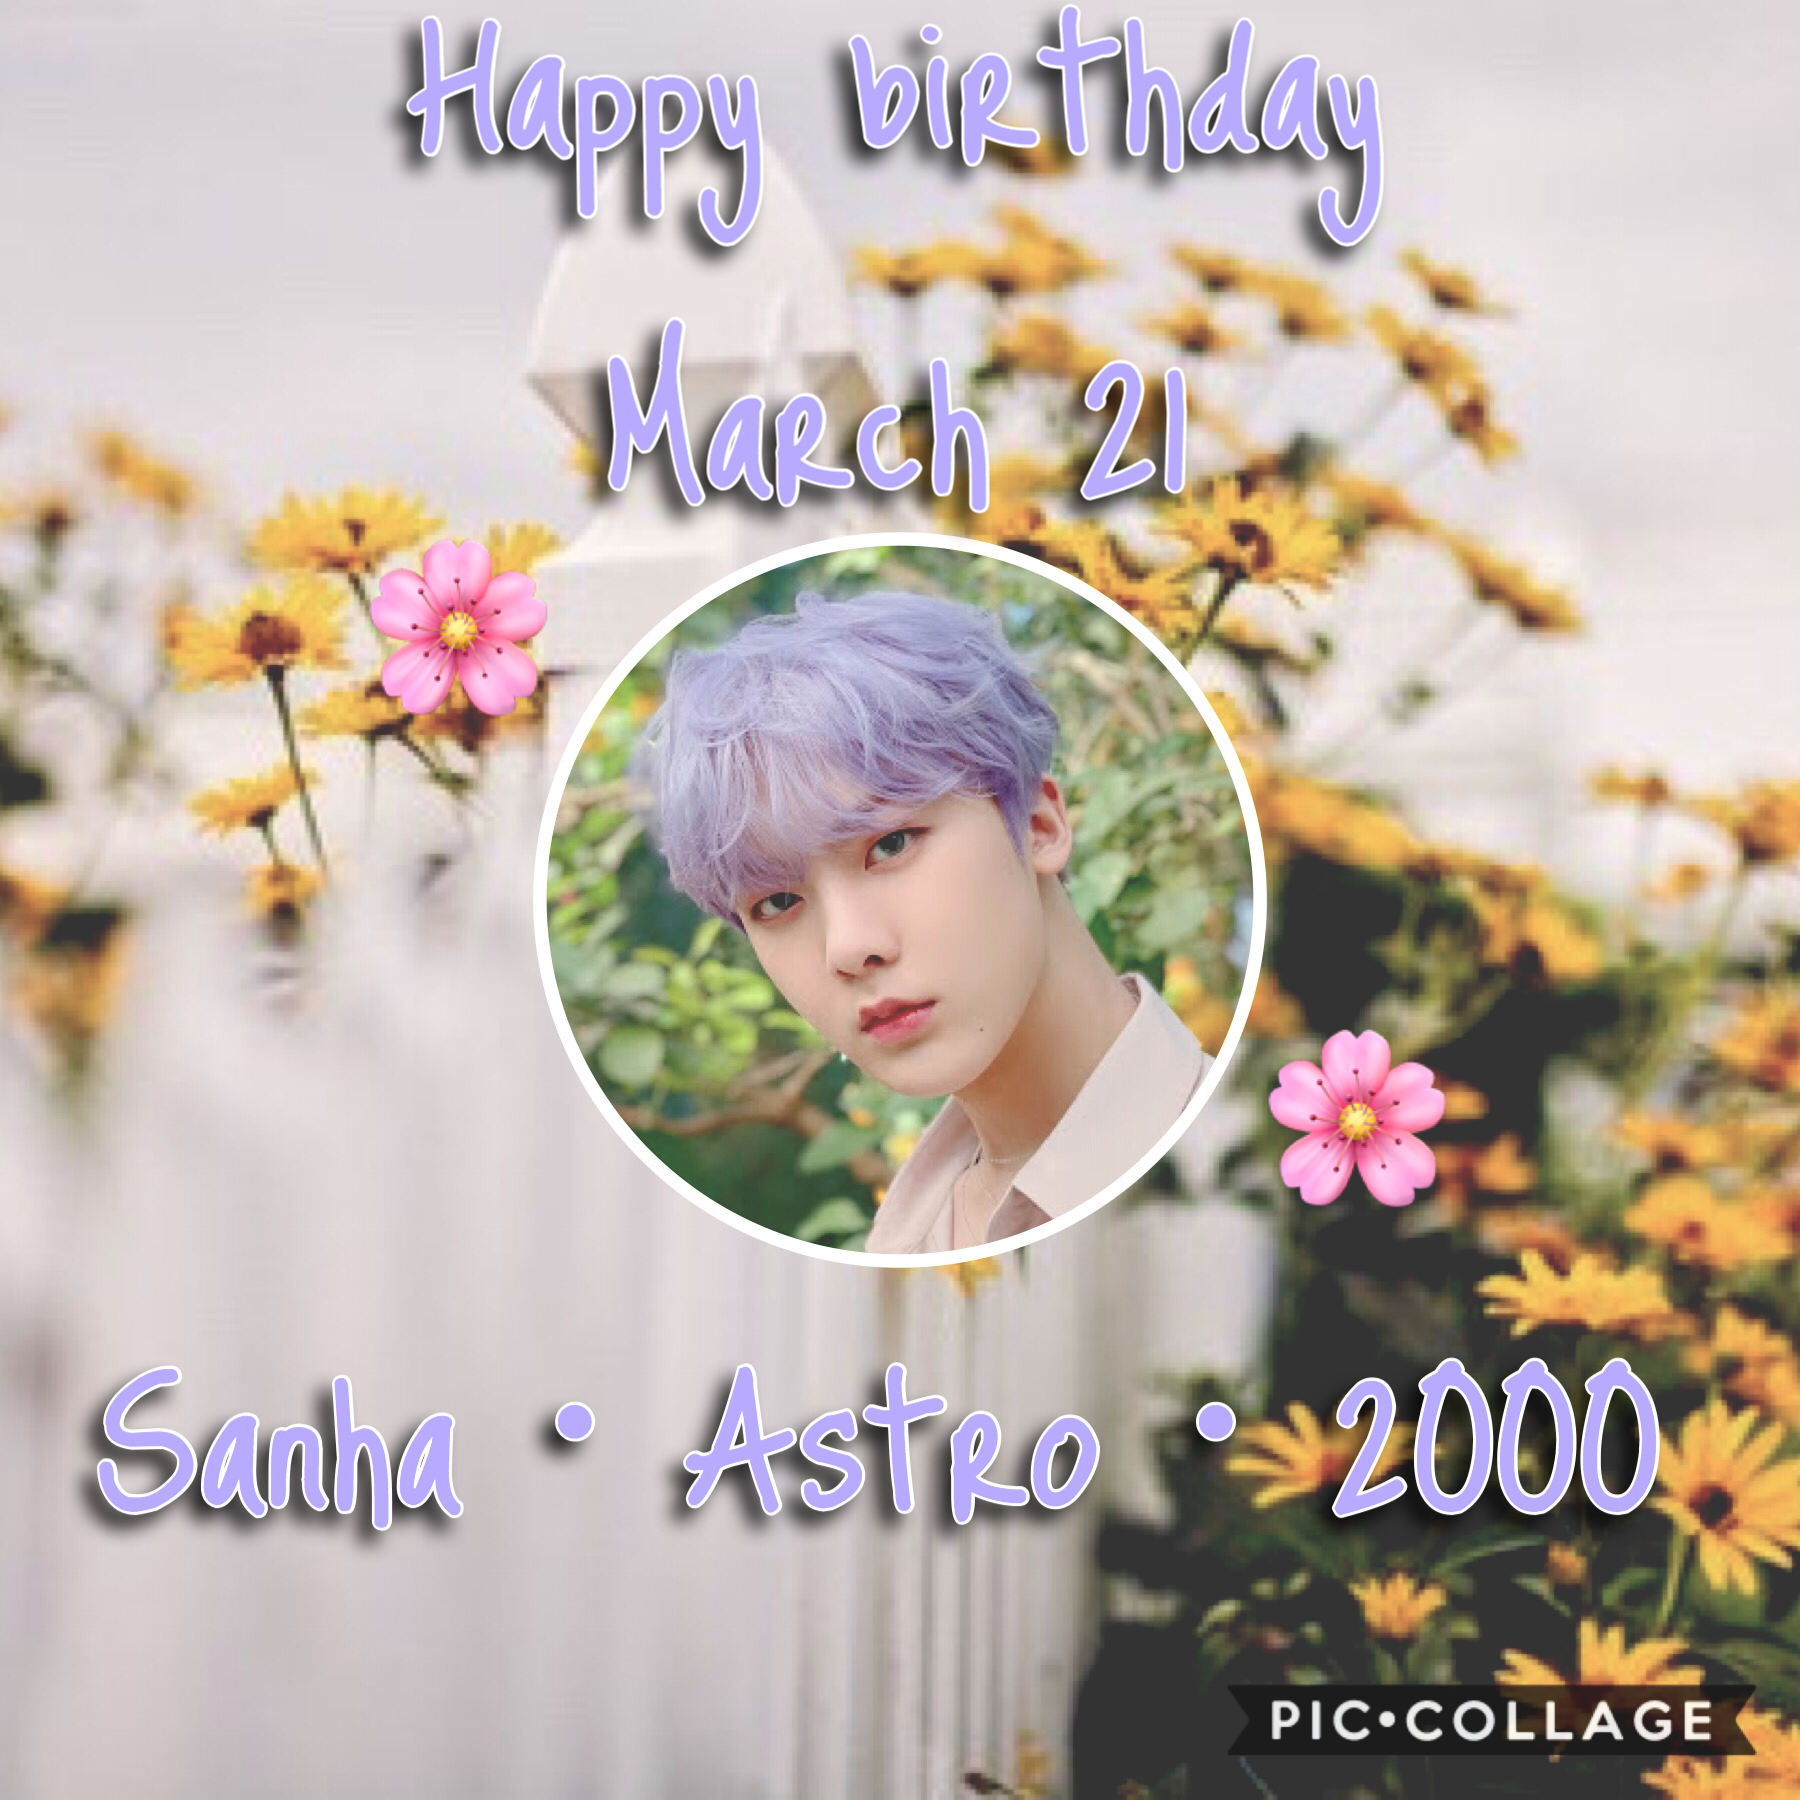 •🌷🌹•
Happy 20th birthday to the maknae of ASTRO!🥺 this cutie!
BTW, happy spring!
Other birthdays:
•Ha Sungwoon~ March 22
🌹🌷~Whoop~🌷🌹